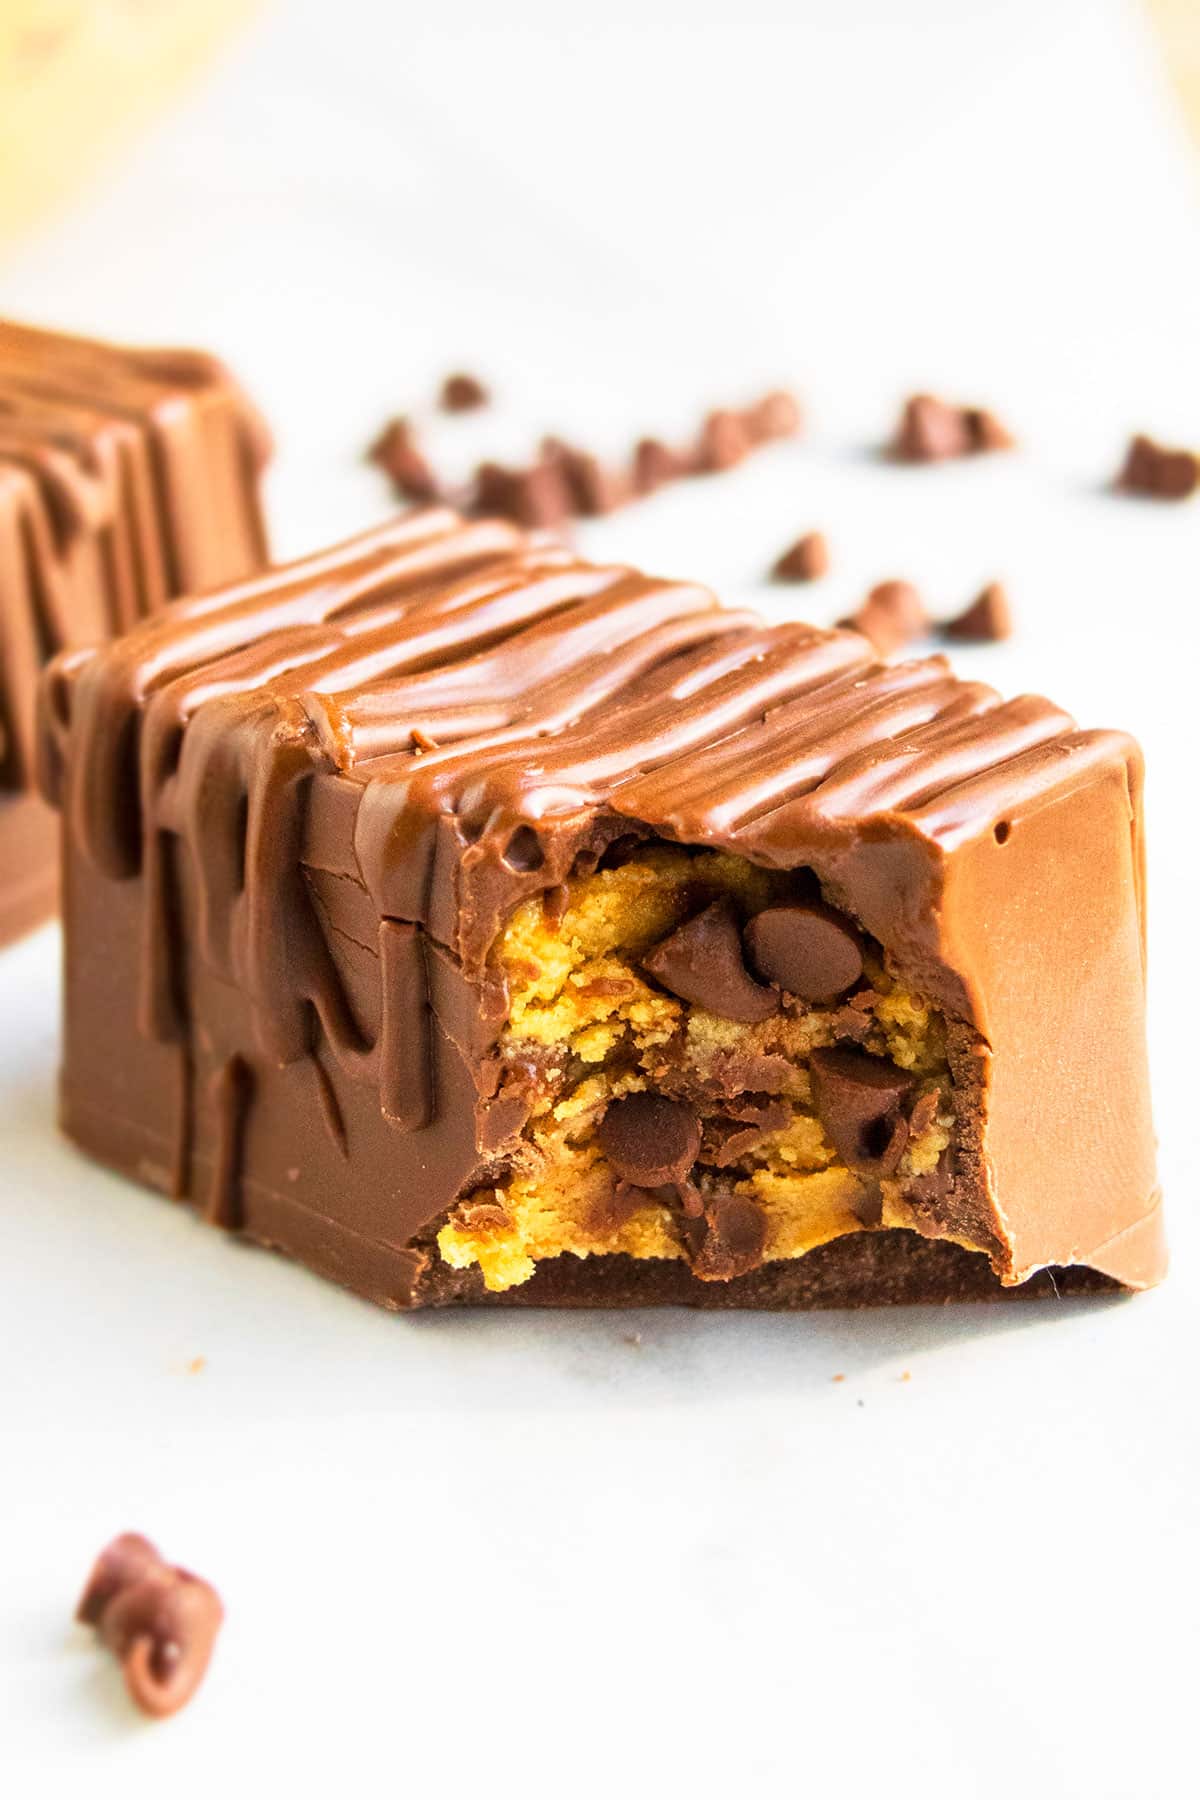 Easy Homemade Eggless Peanut Butter Cookie Dough Bars With Chocolate Chips on White Marble Background. 